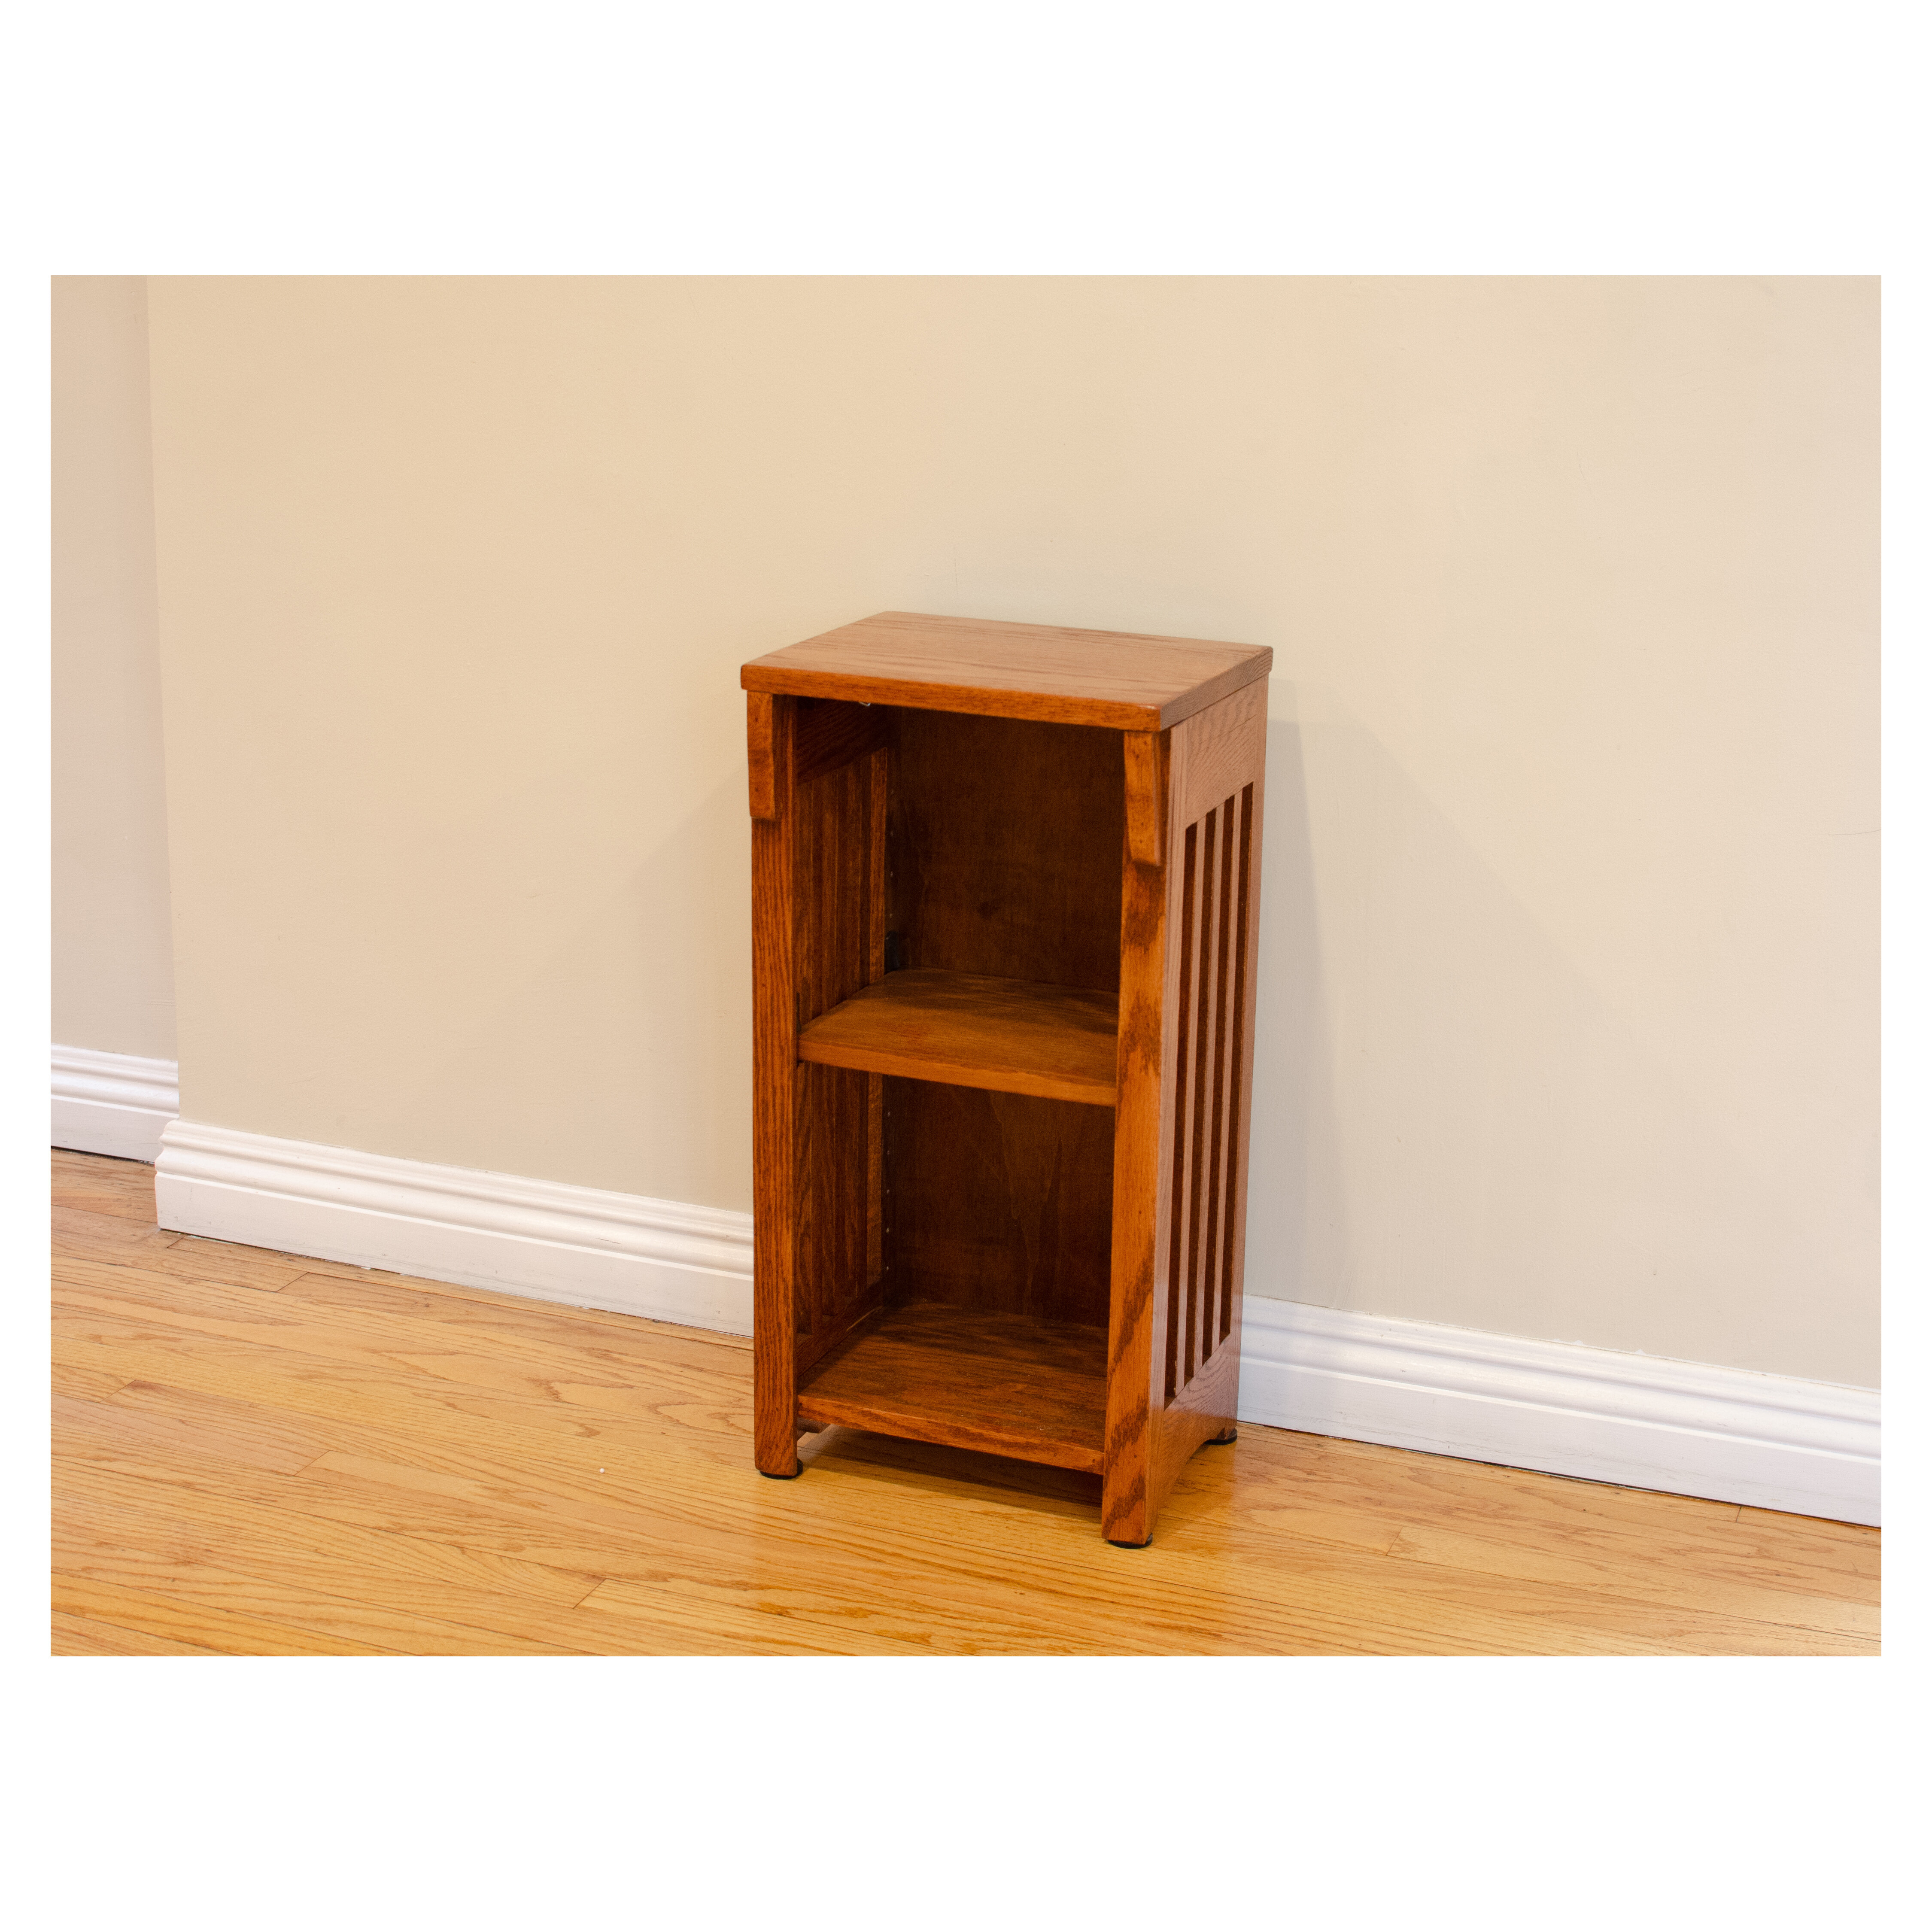 Millwood Pines Romriell Mission Spindle Standard Bookcase